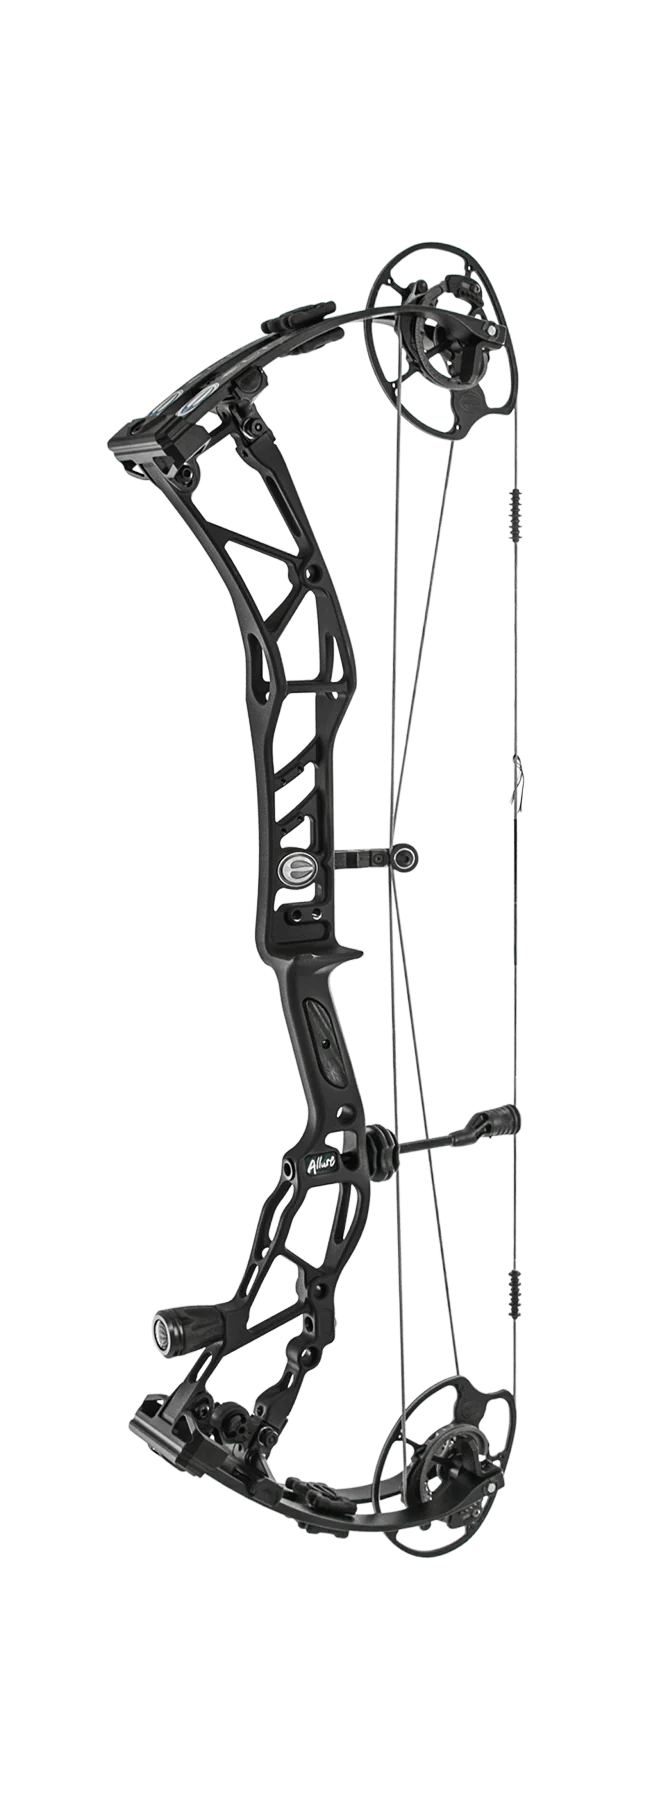 Elite Archery Allure Compound Bow - Leapfrog Outdoor Sports and Apparel